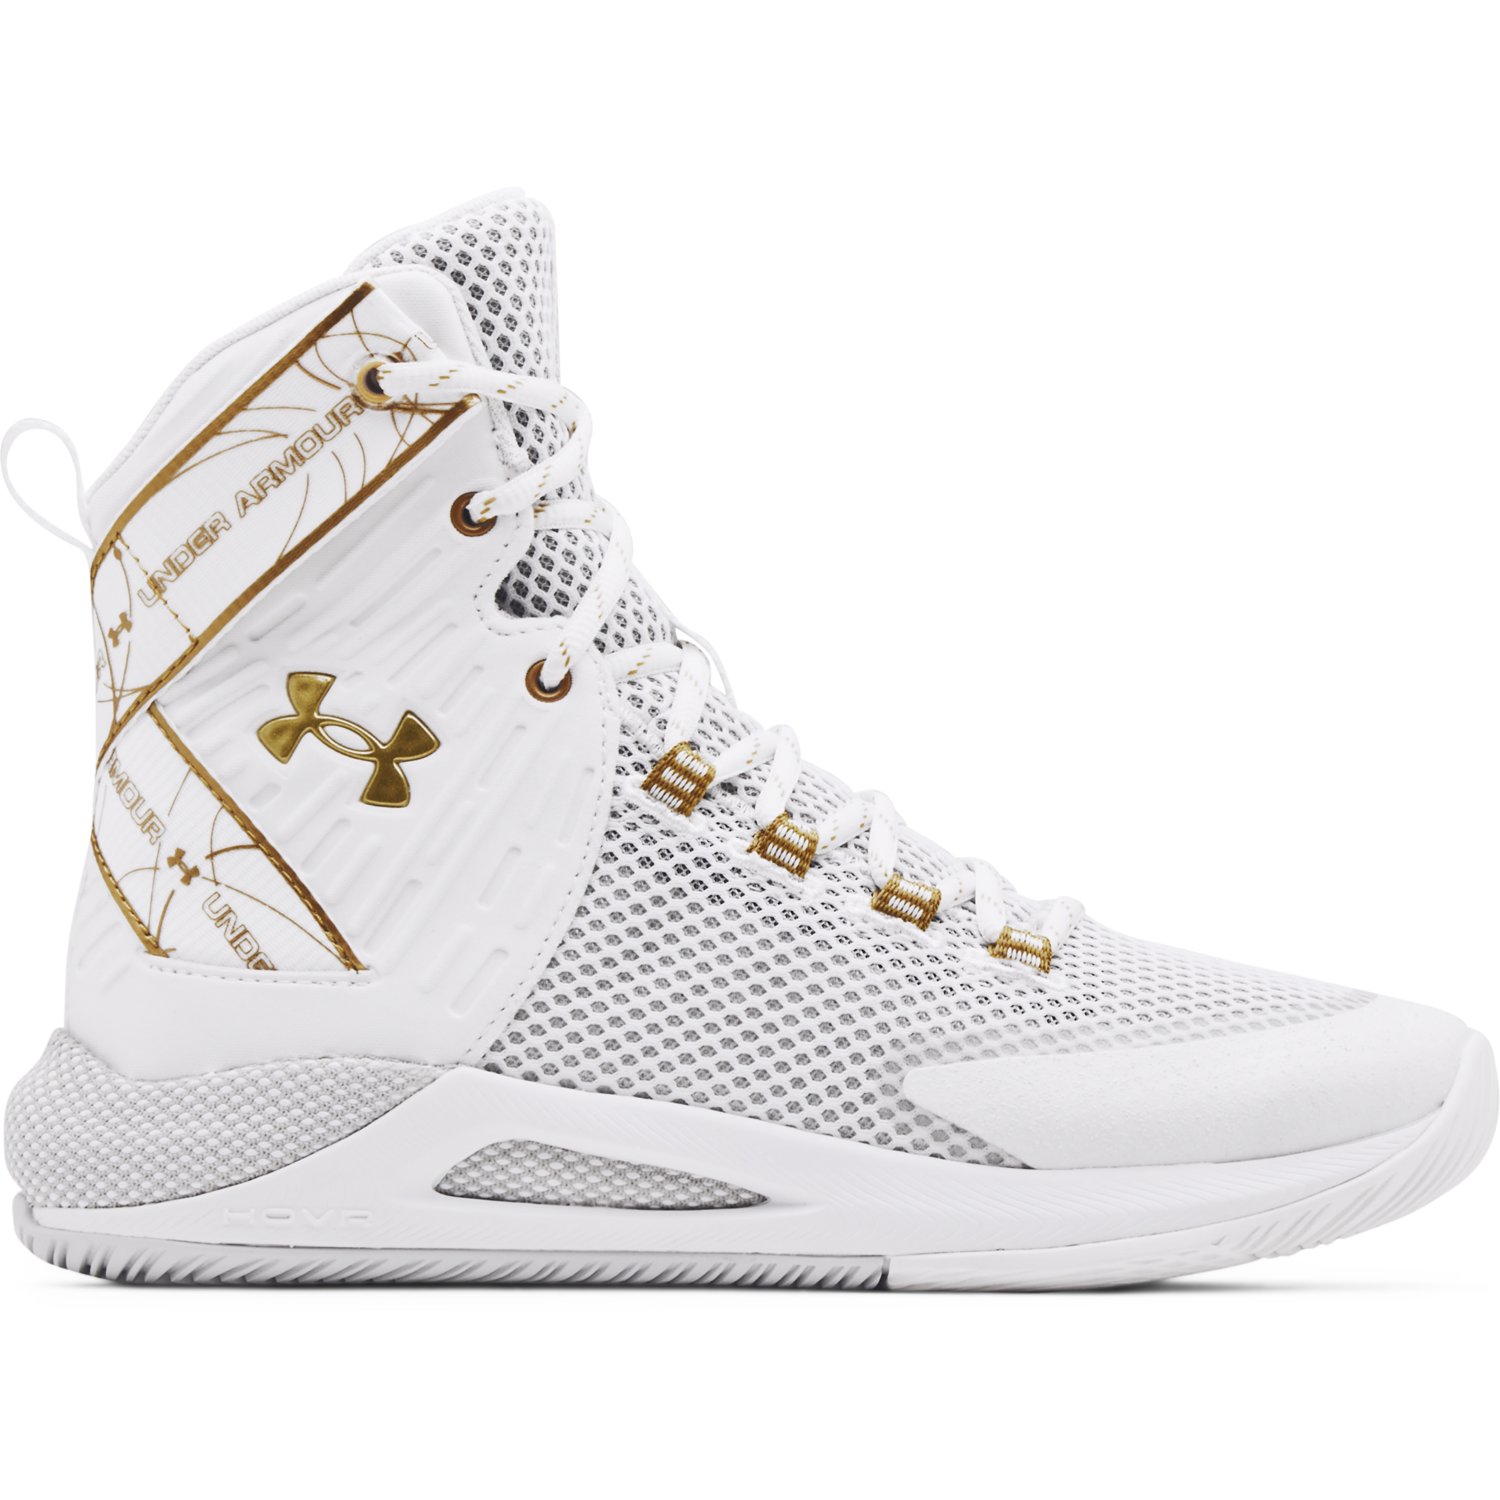 Does Under Armour Make Wrestling Shoes? - Shoe Effect